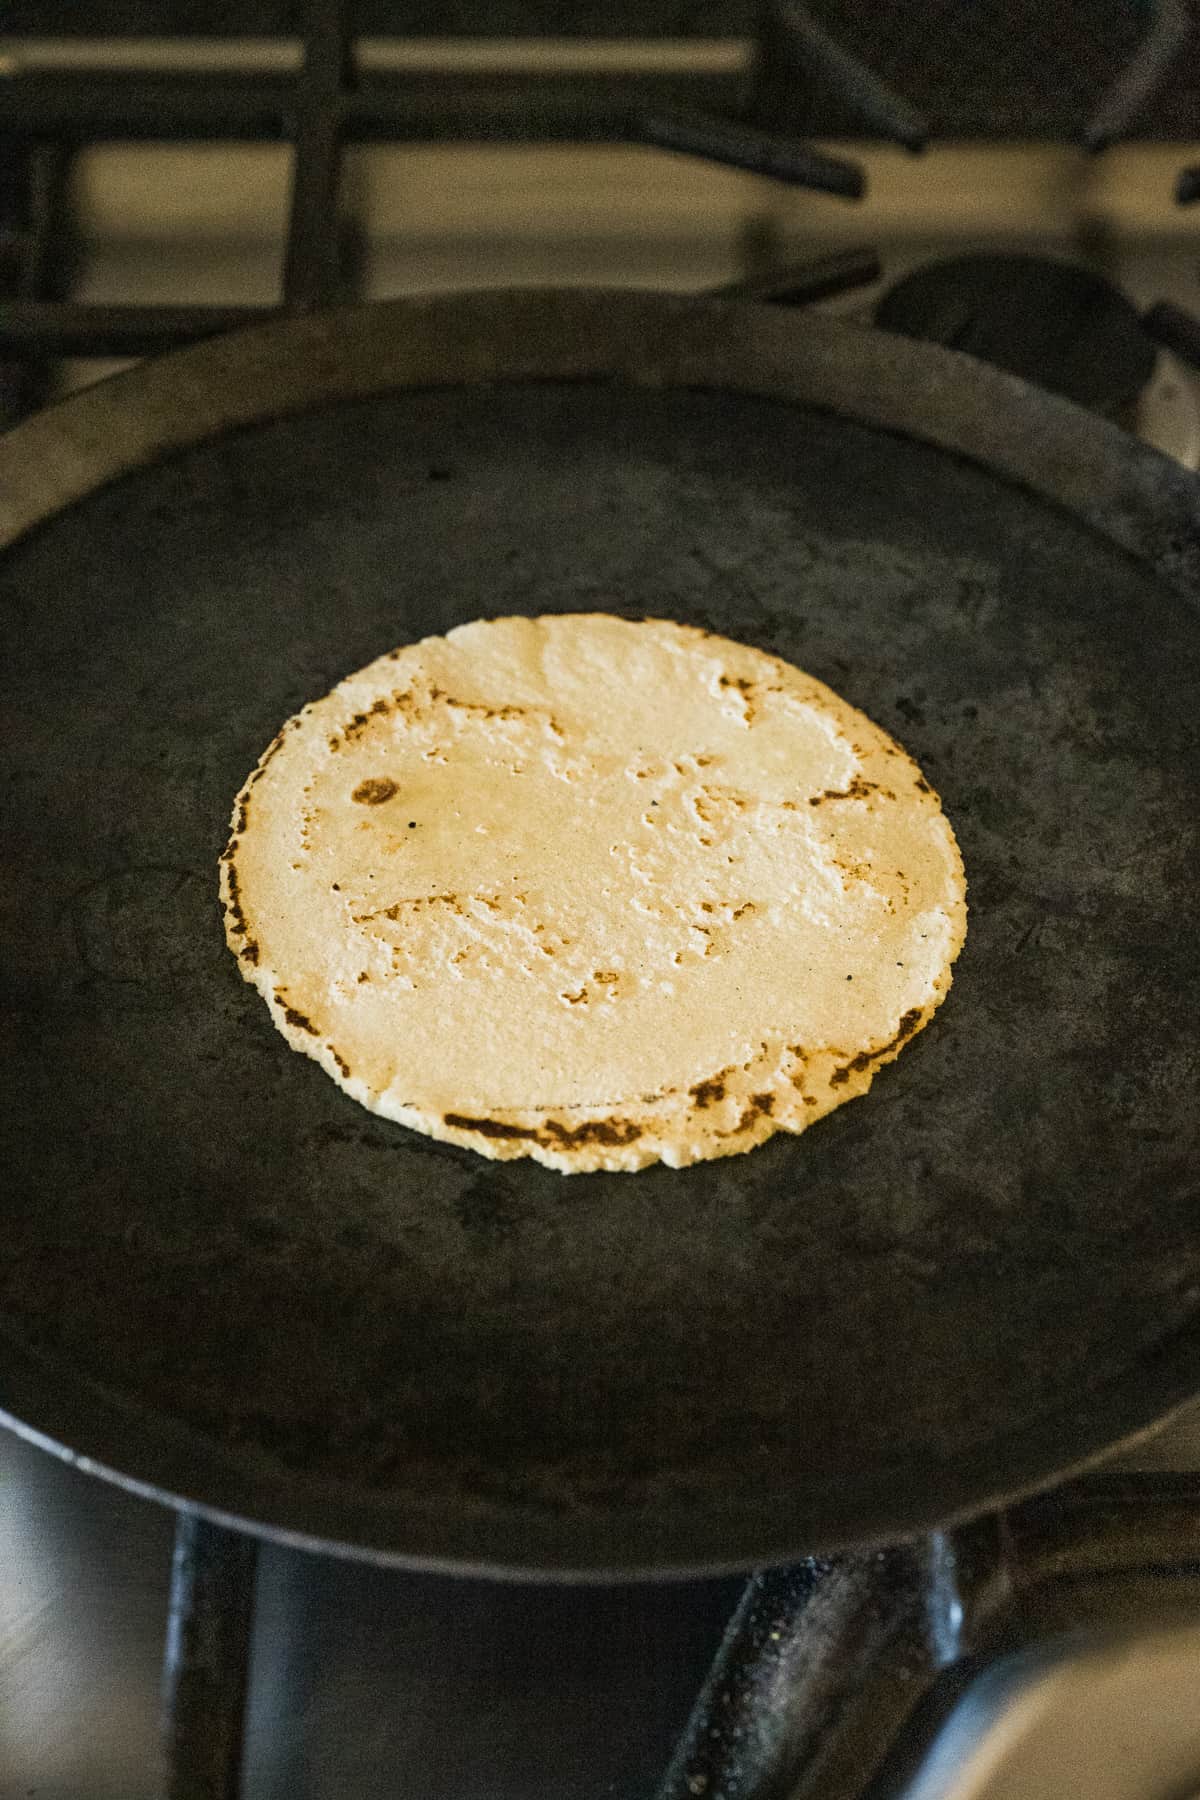 A cooked corn tortilla on a comal.